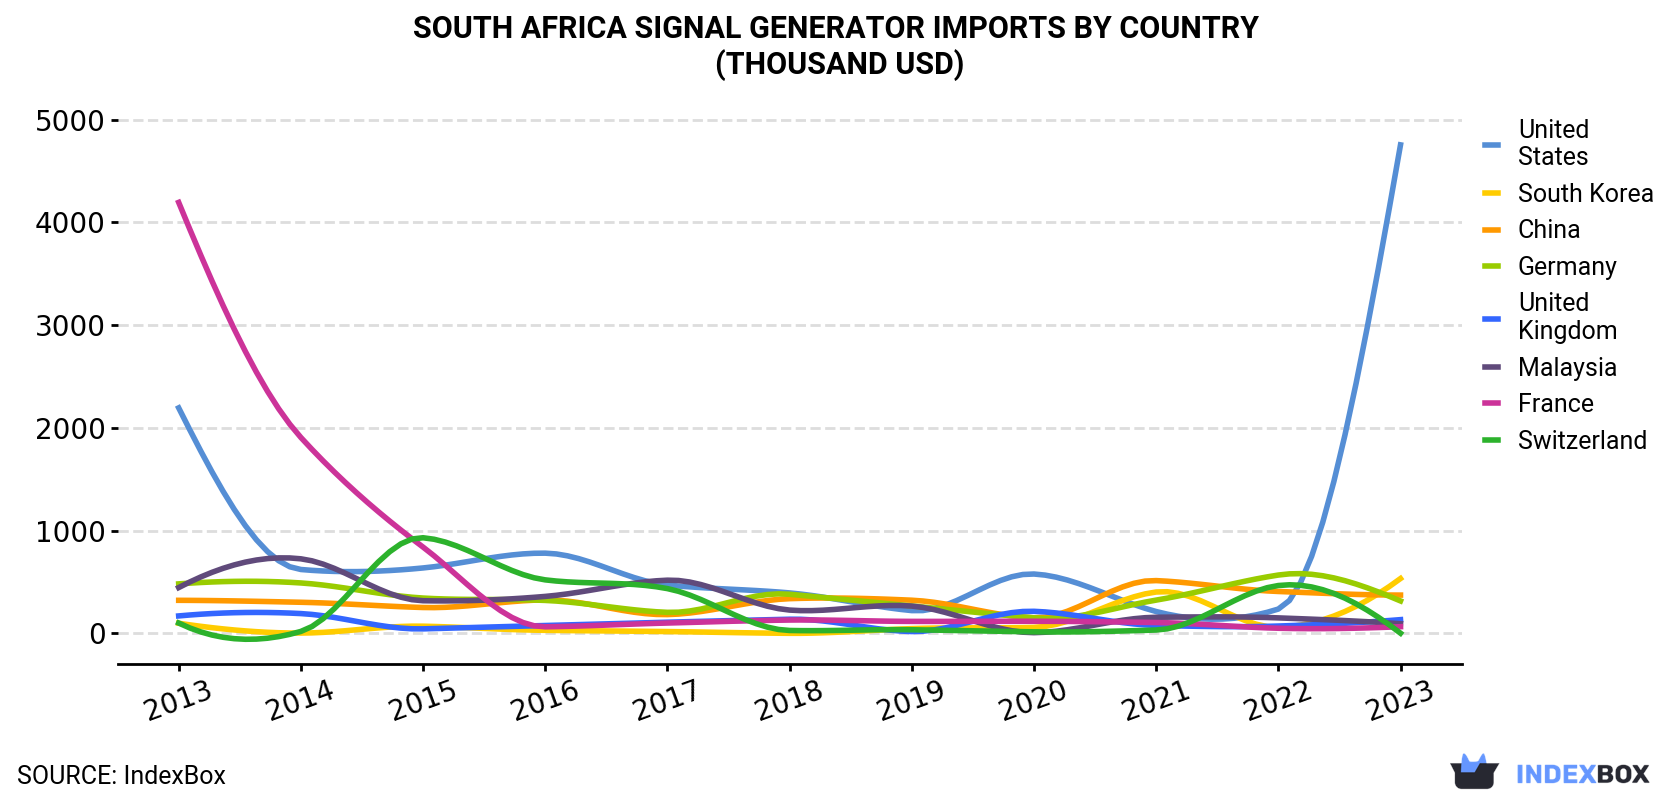 South Africa Signal Generator Imports By Country (Thousand USD)